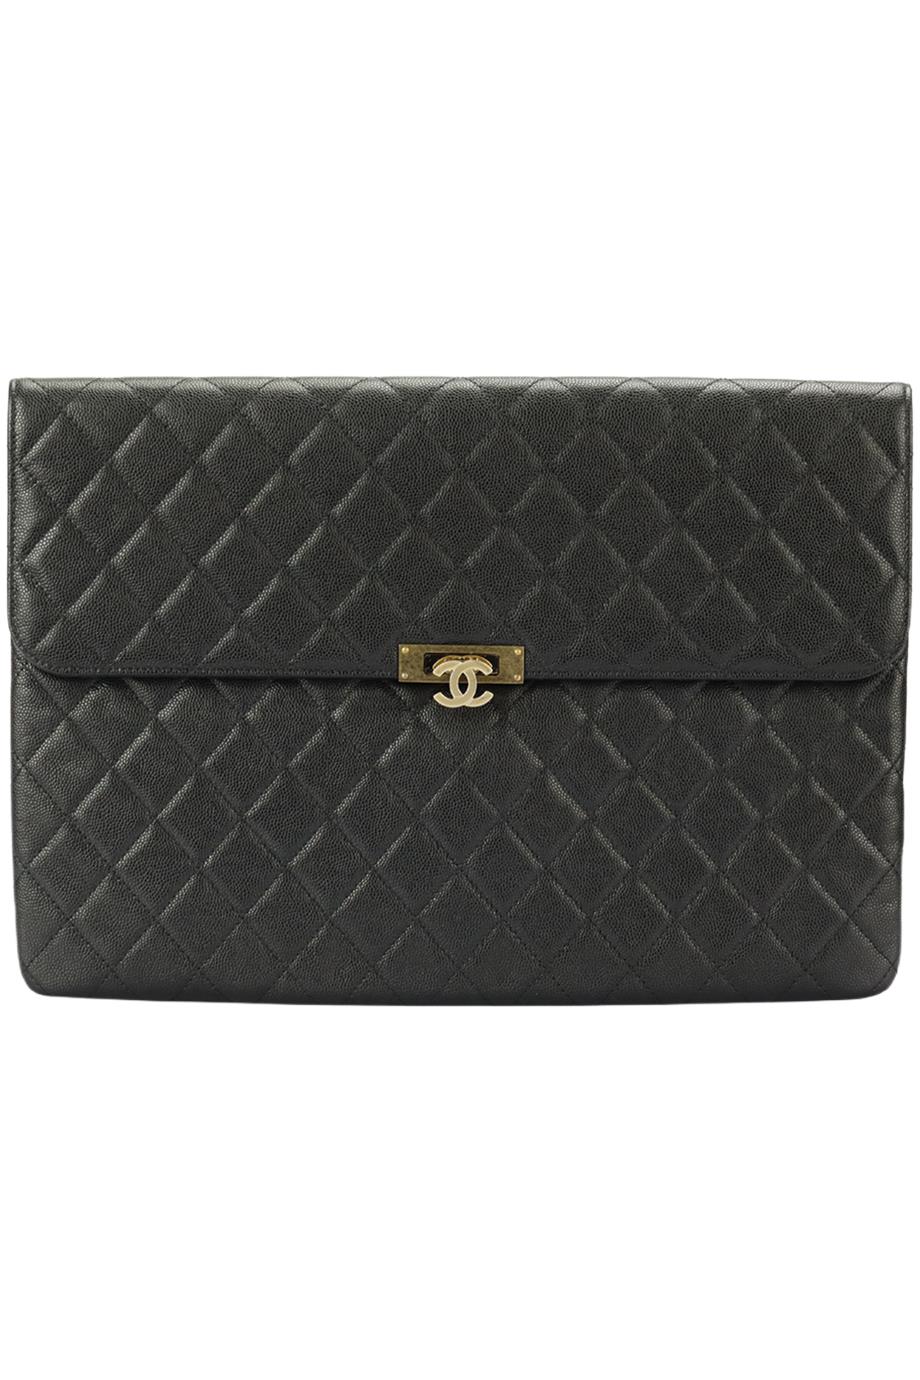 Sold at Auction: Chanel - Large Caviar O Case Clutch Black Quilted Leather  Zip Bag Pouch Gold CC